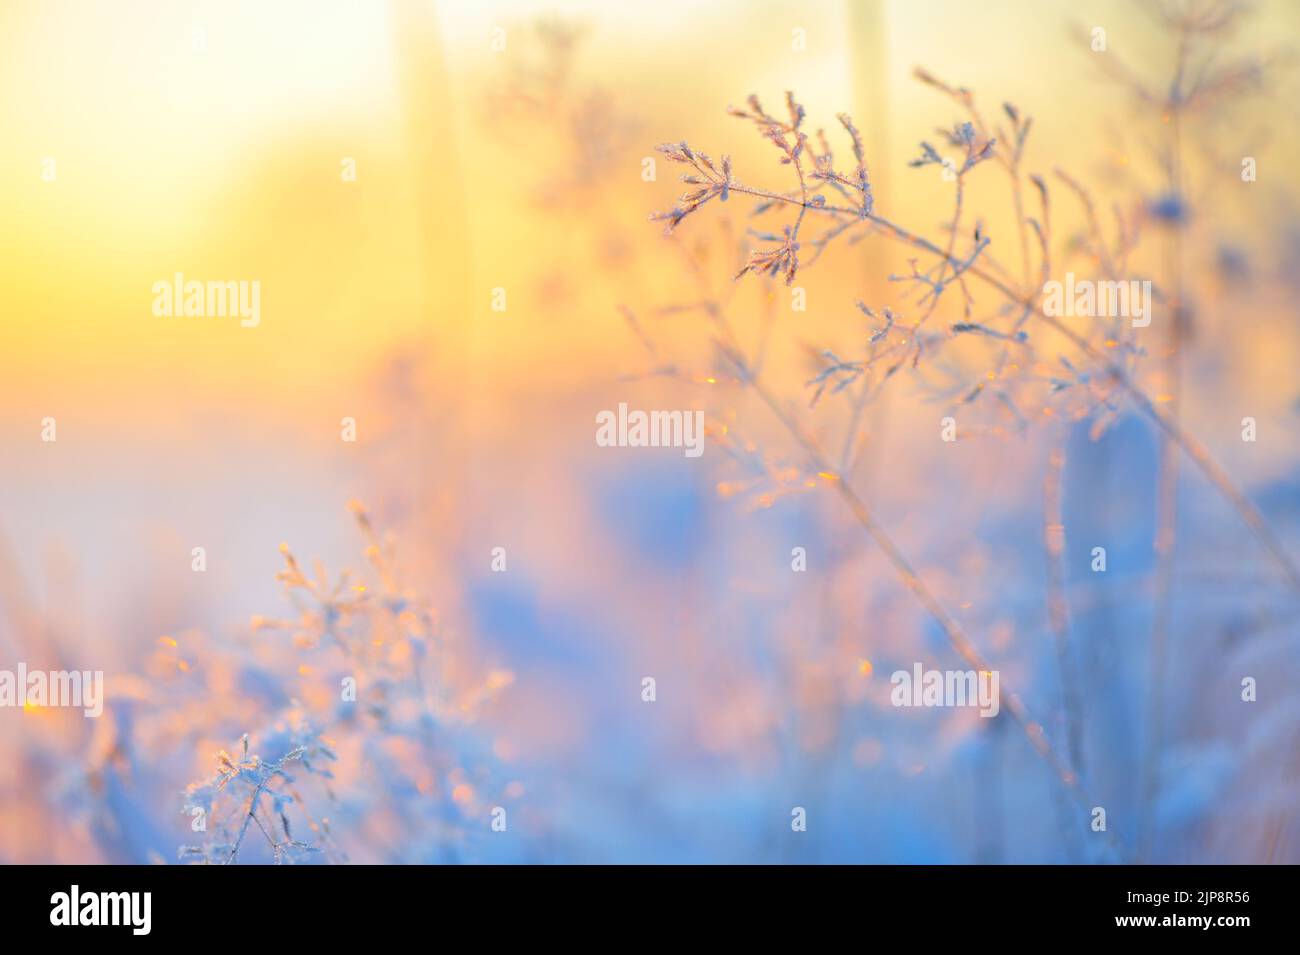 Frost and ice crystals on grass. Selective focus and shallow depth of field. Stock Photo